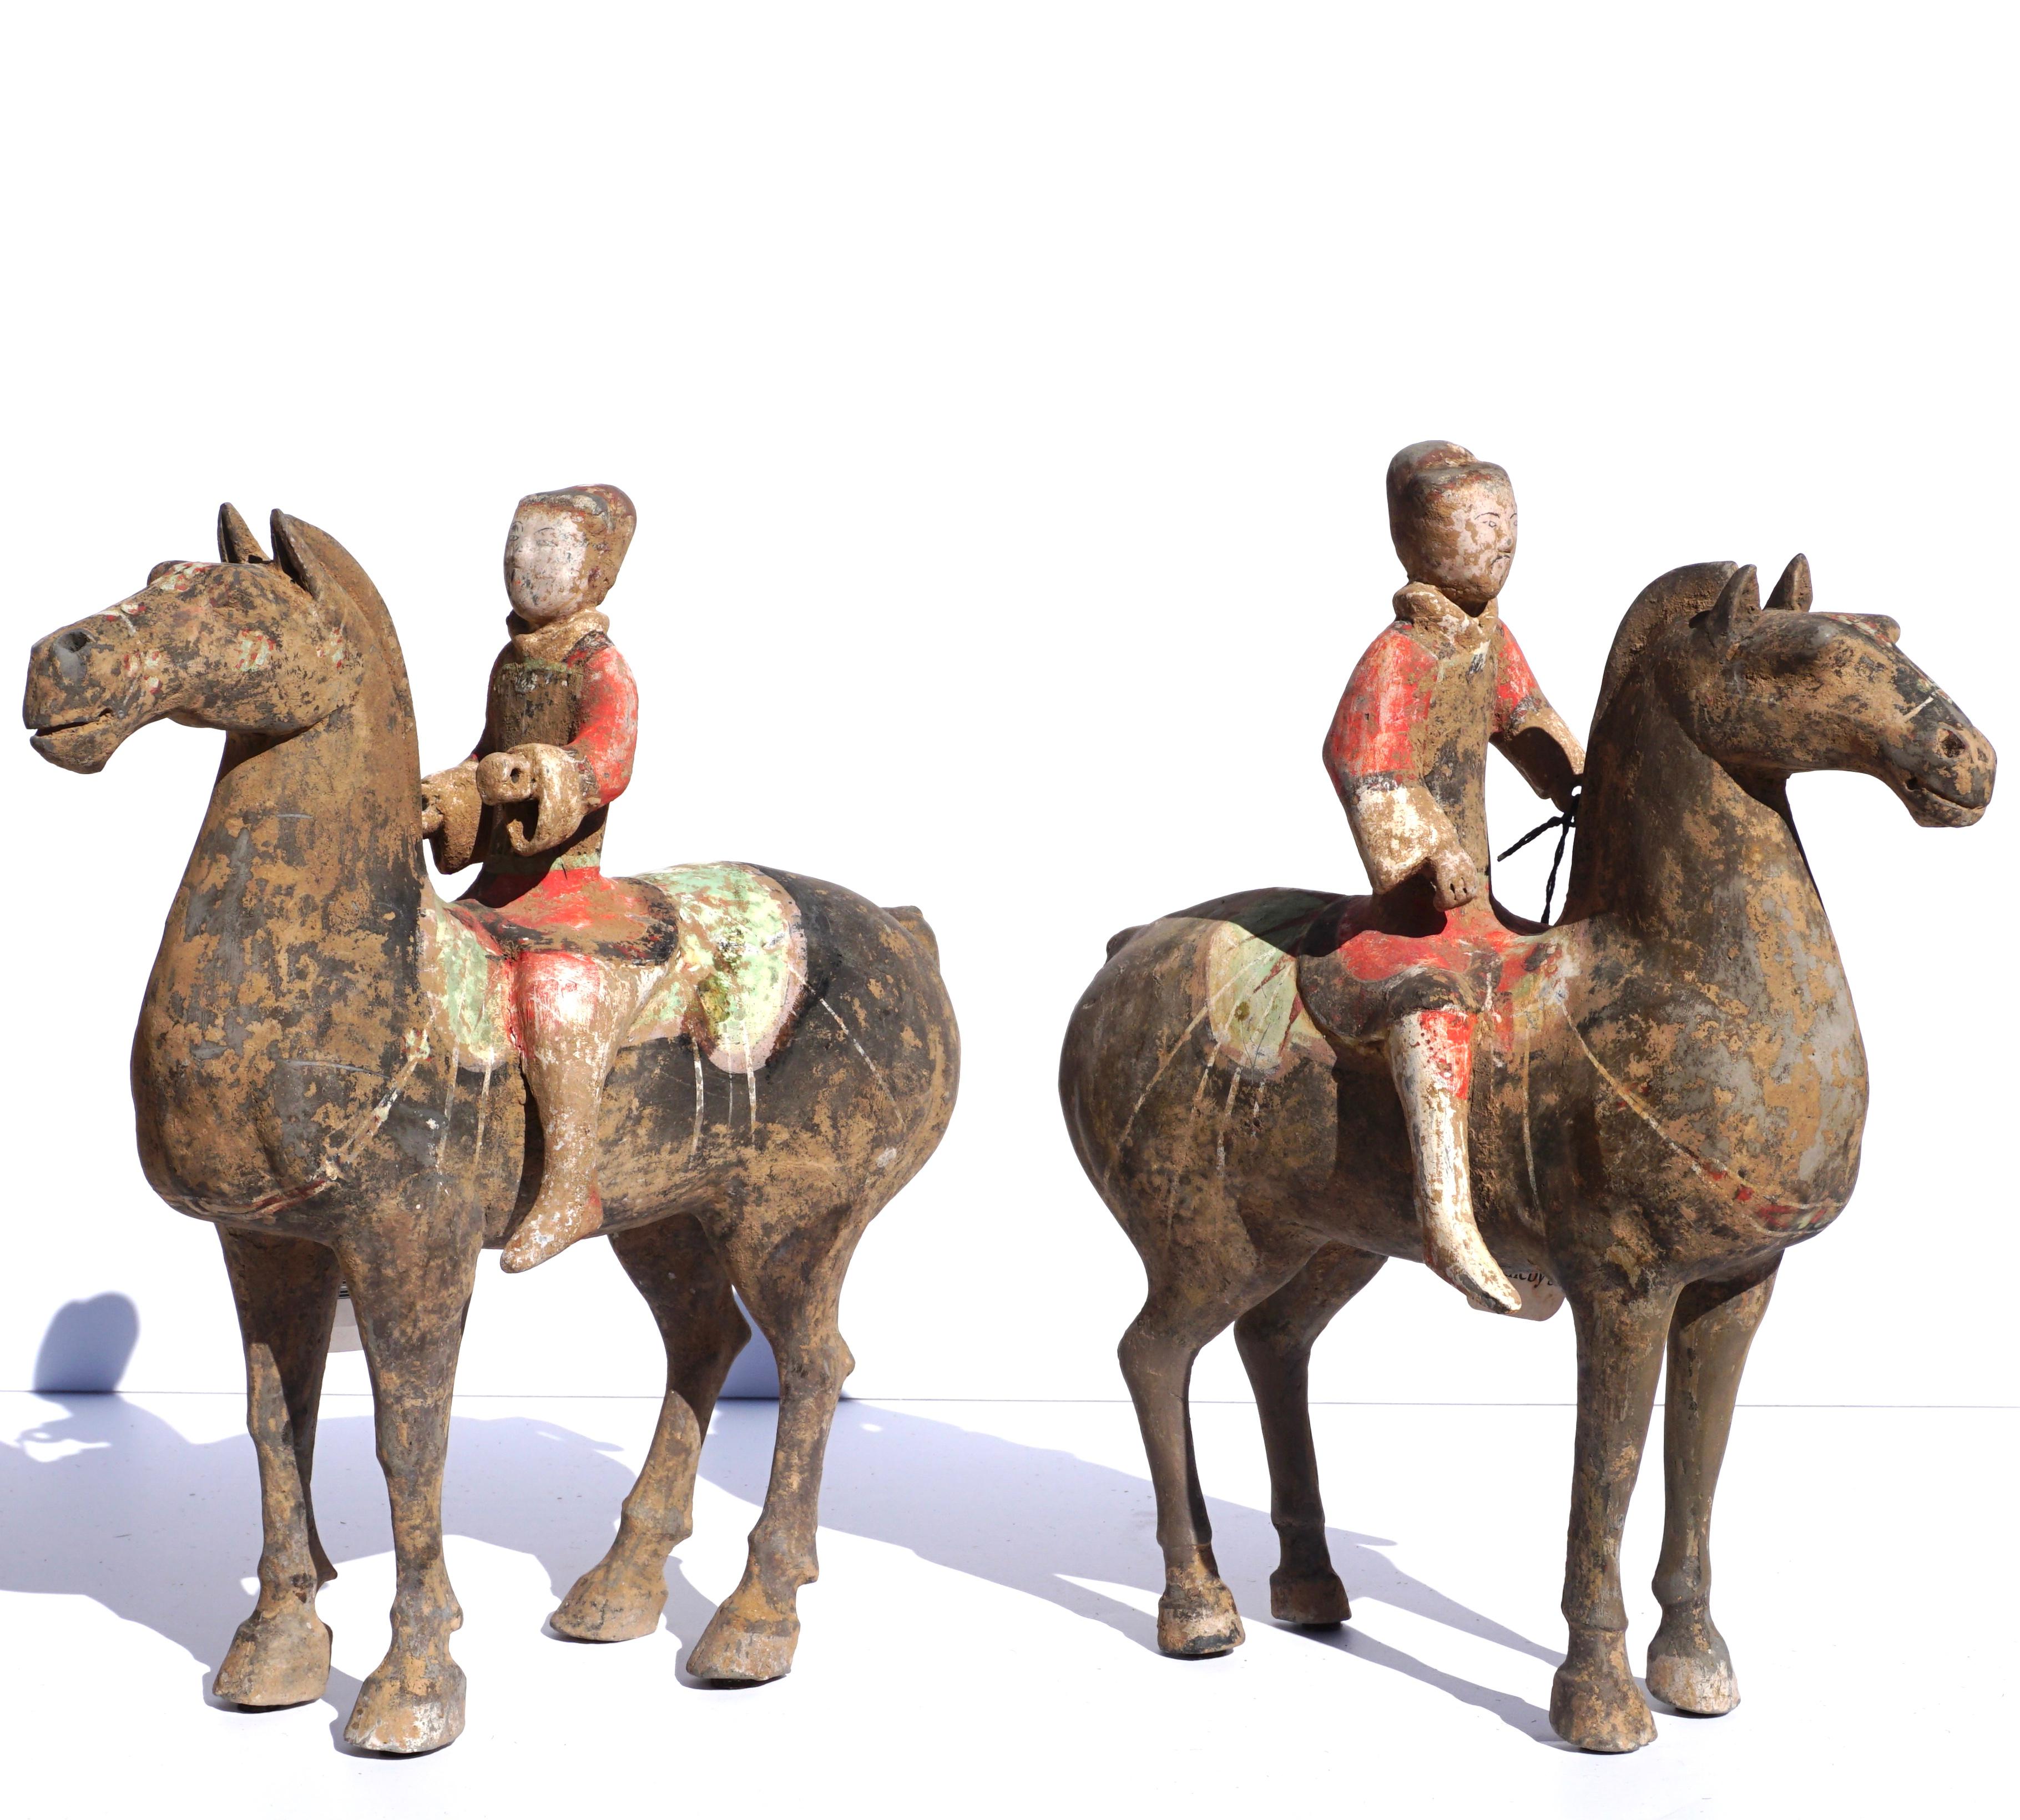 A wonderful pair of Ex Sotheby’s painted Polychrome Equestrian Horse and Riders made from gray pottery, Presents beautifully and guaranteed authentic with provenance and COA. 

Measures: Height 11.5 inches and width 11 inches

Condition: Possible